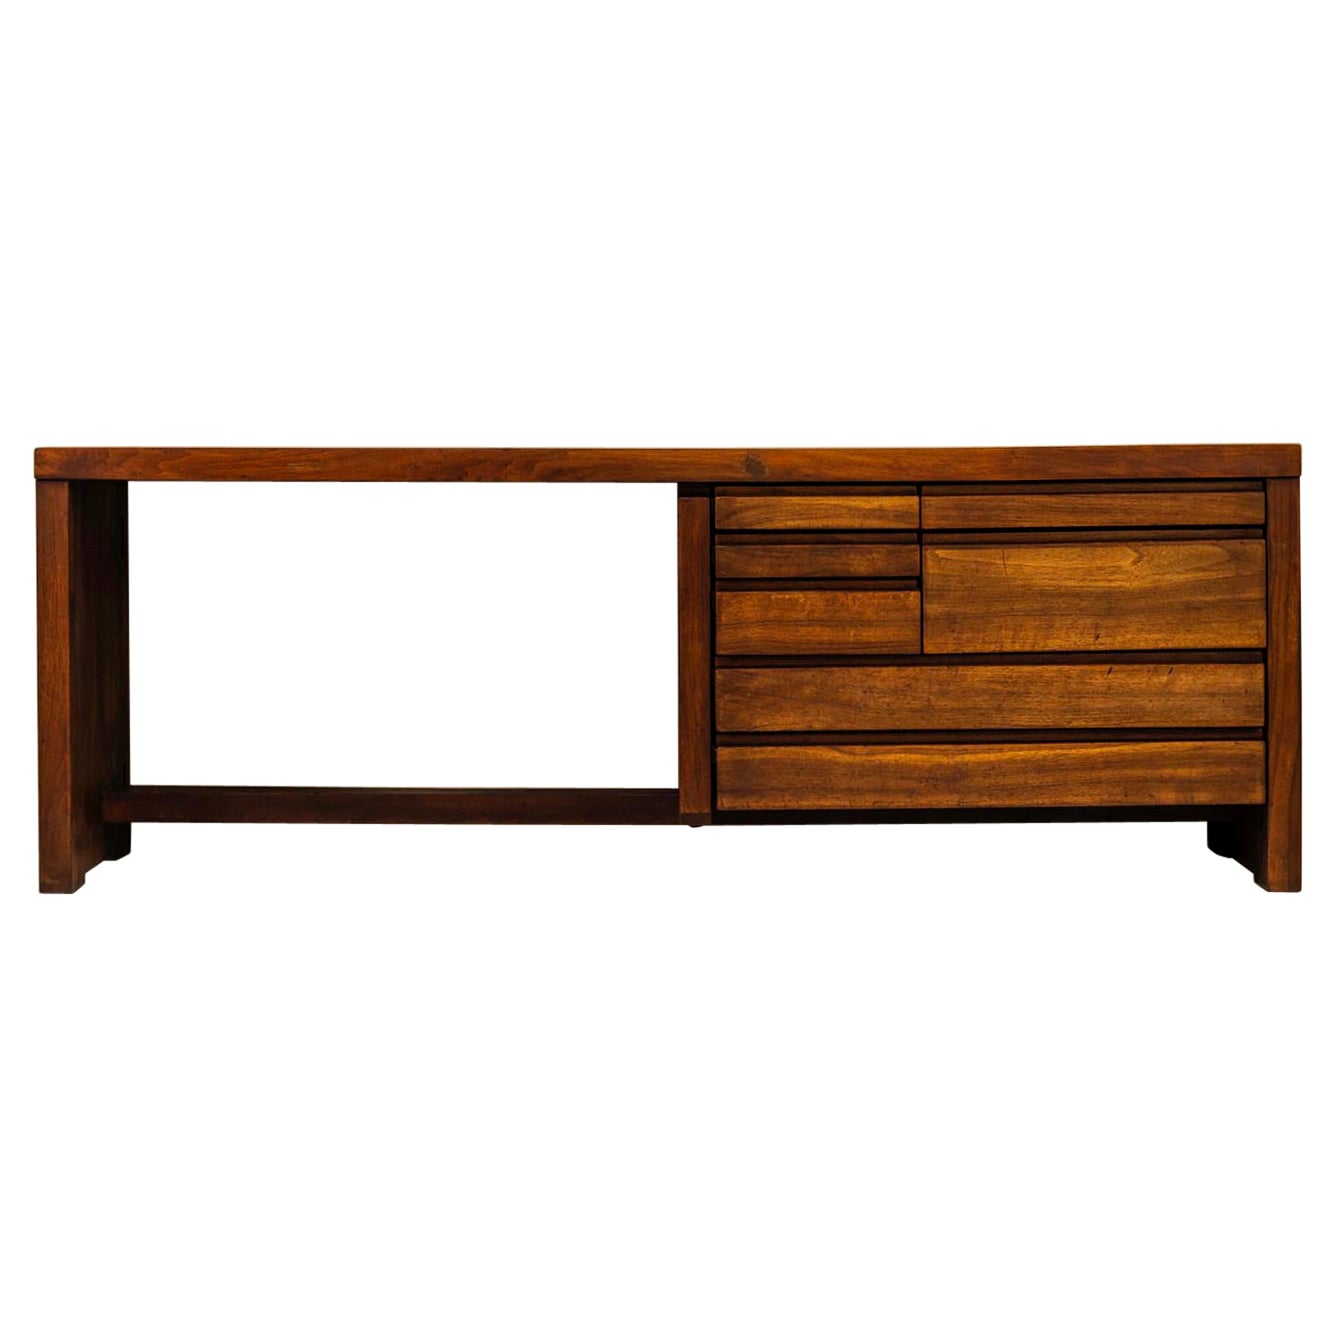 Pierre Chapo 'R05' Dressing Table in Walnut, France 1960s For Sale